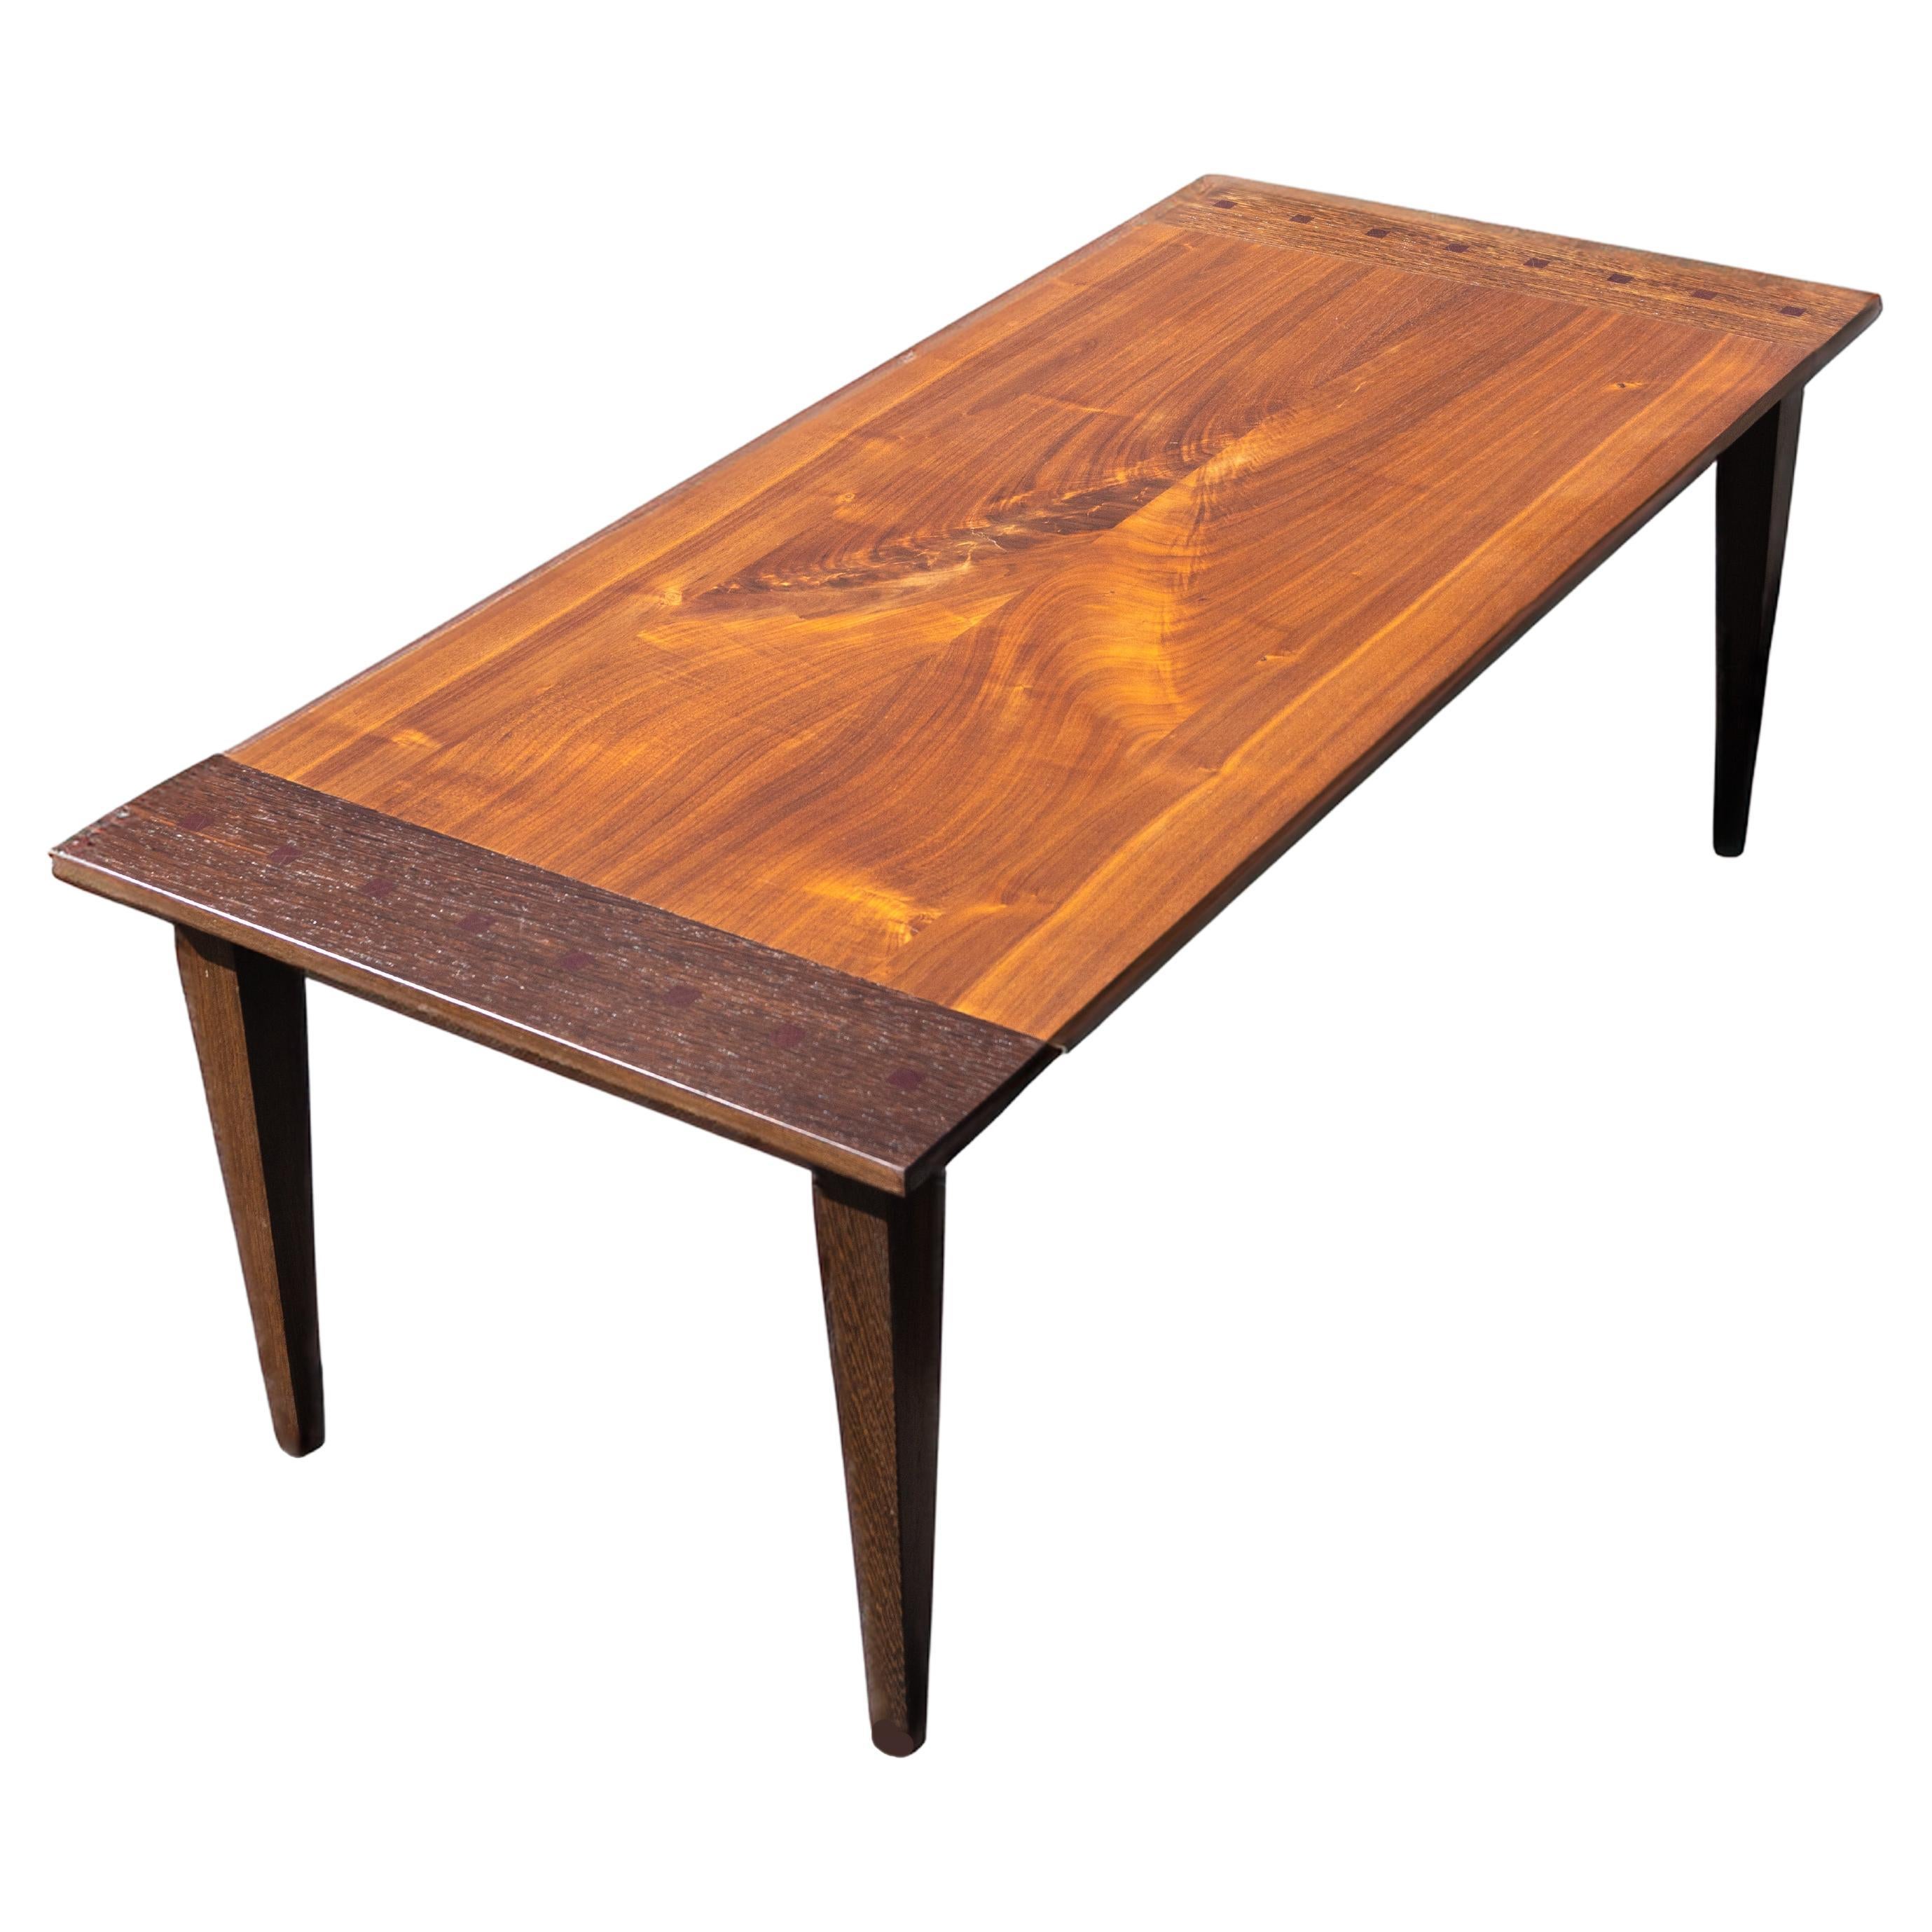 Pegged Joinery Endcap Coffee Table - Wenge  Black Walnut  Purple Heart For Sale